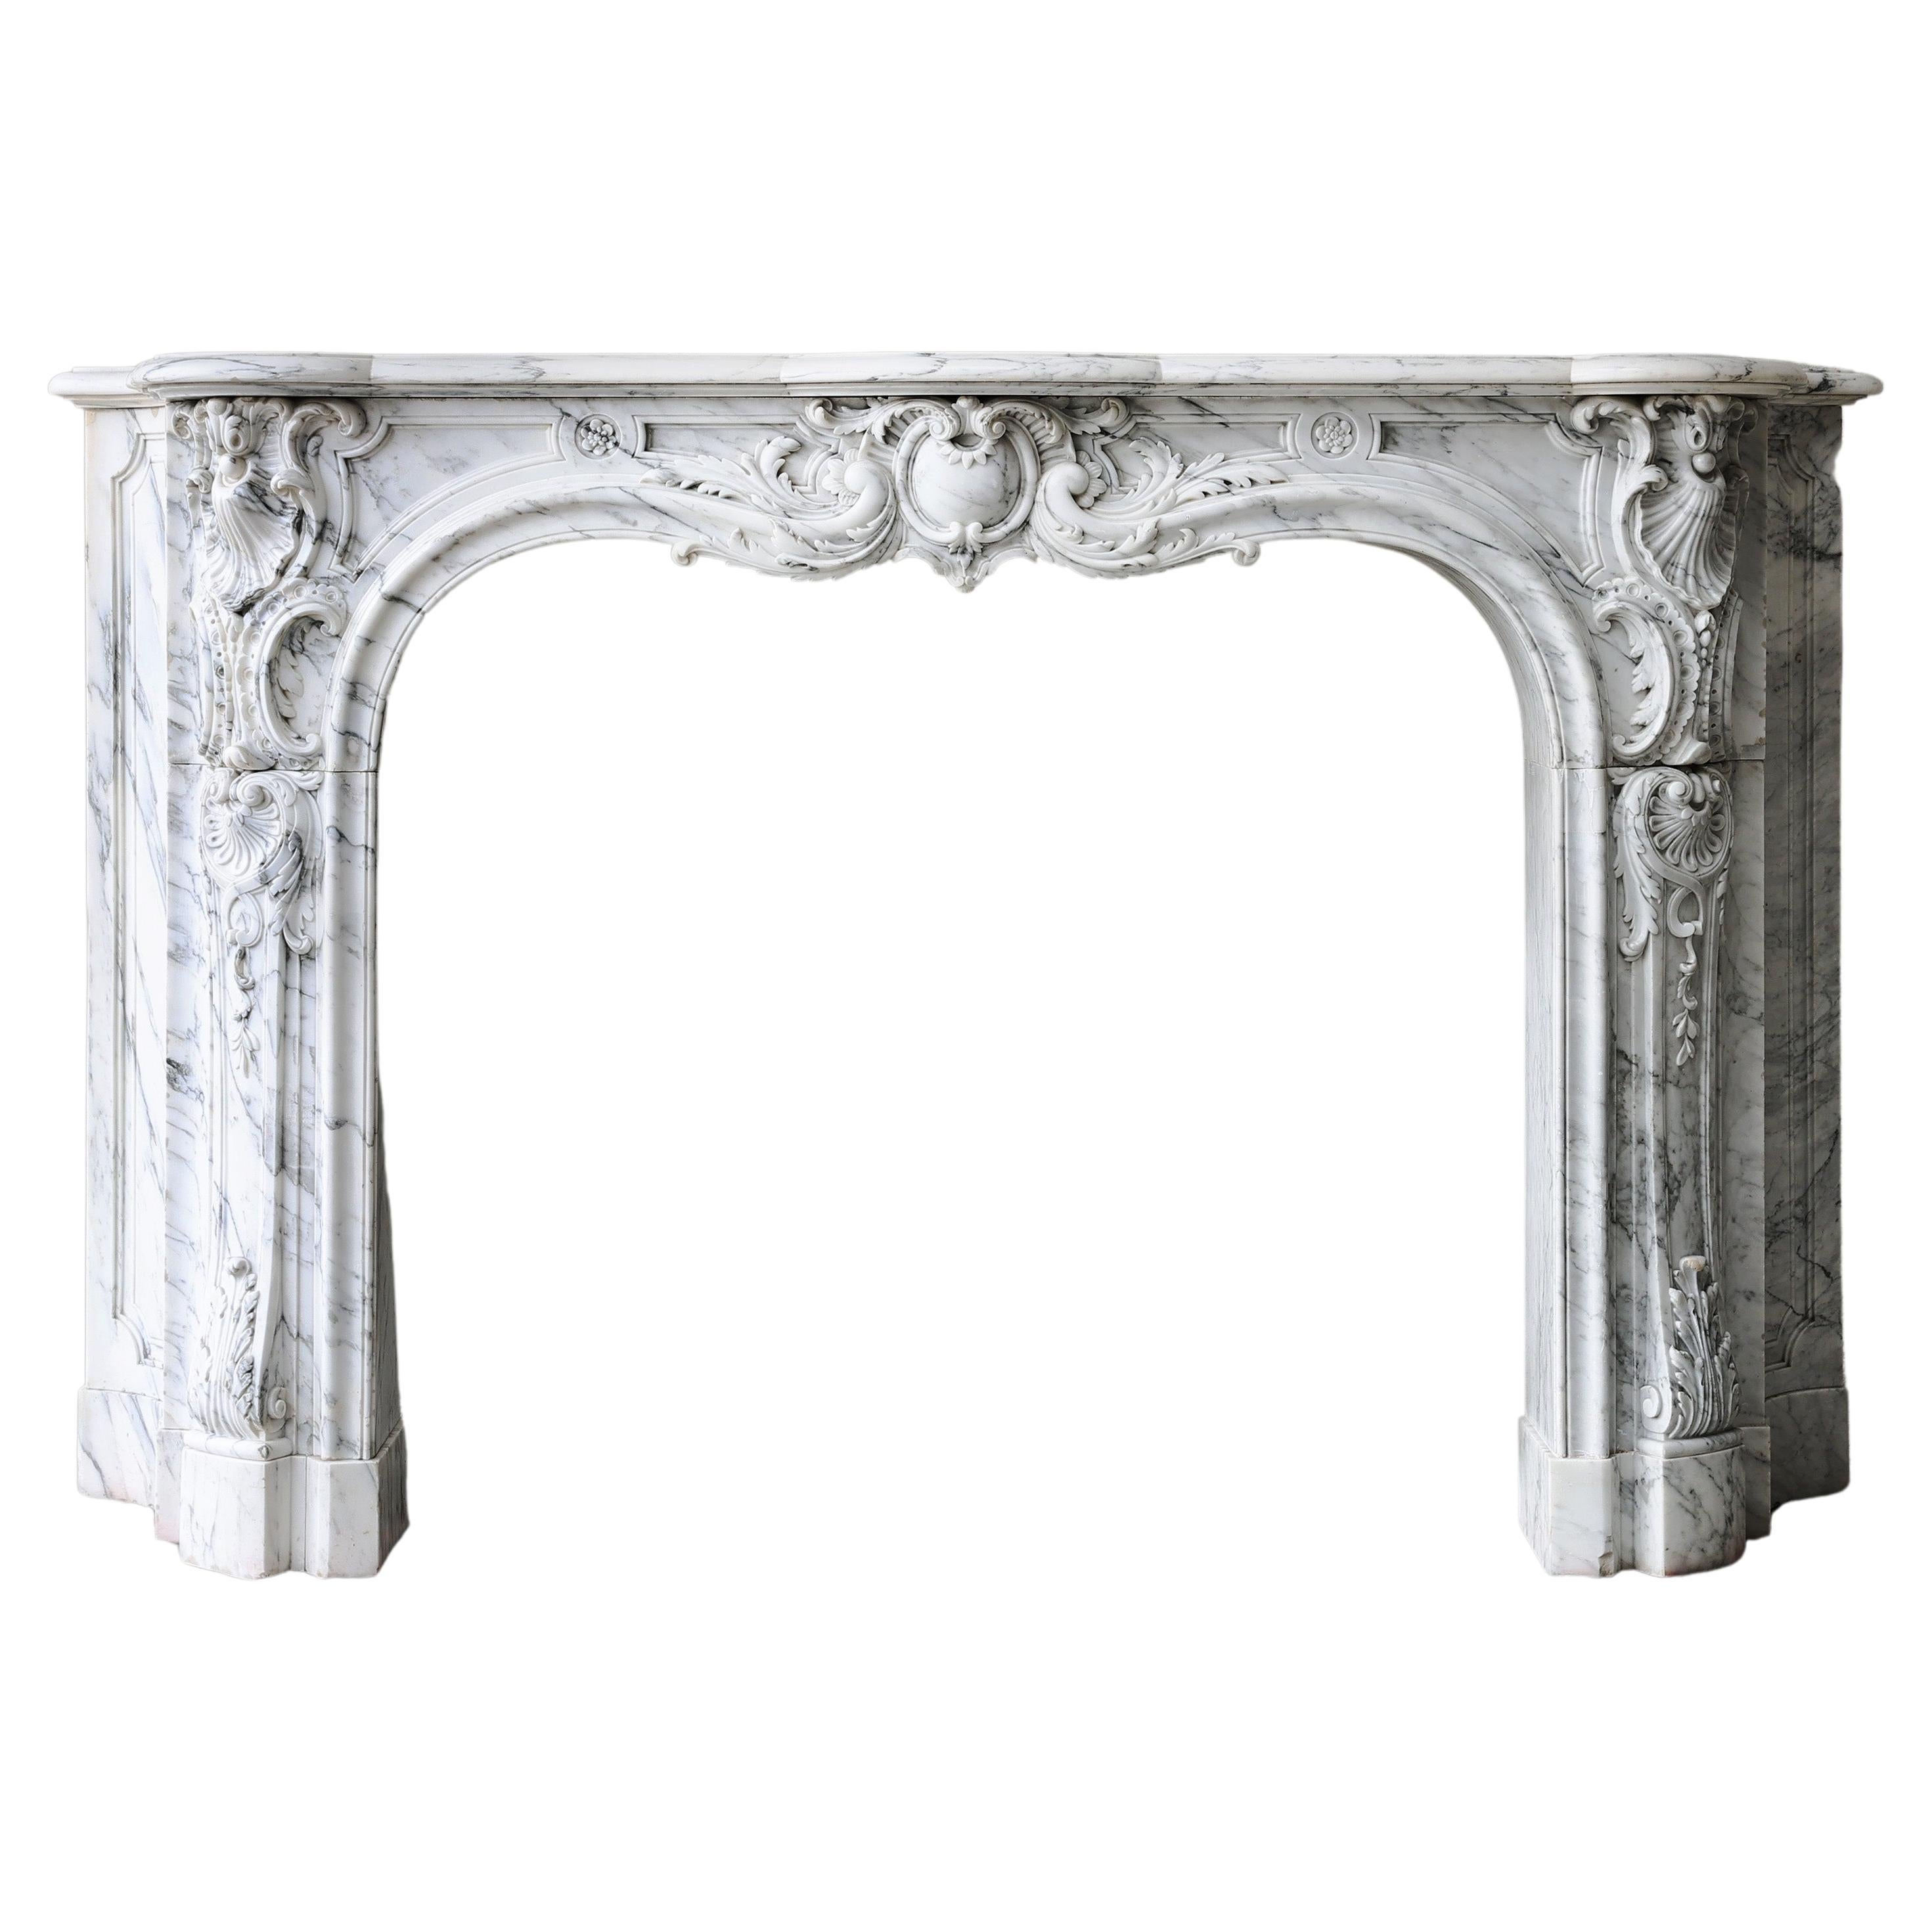 Antique Marble Fireplace  Arabescato Marble  19th Century  Monumental For Sale